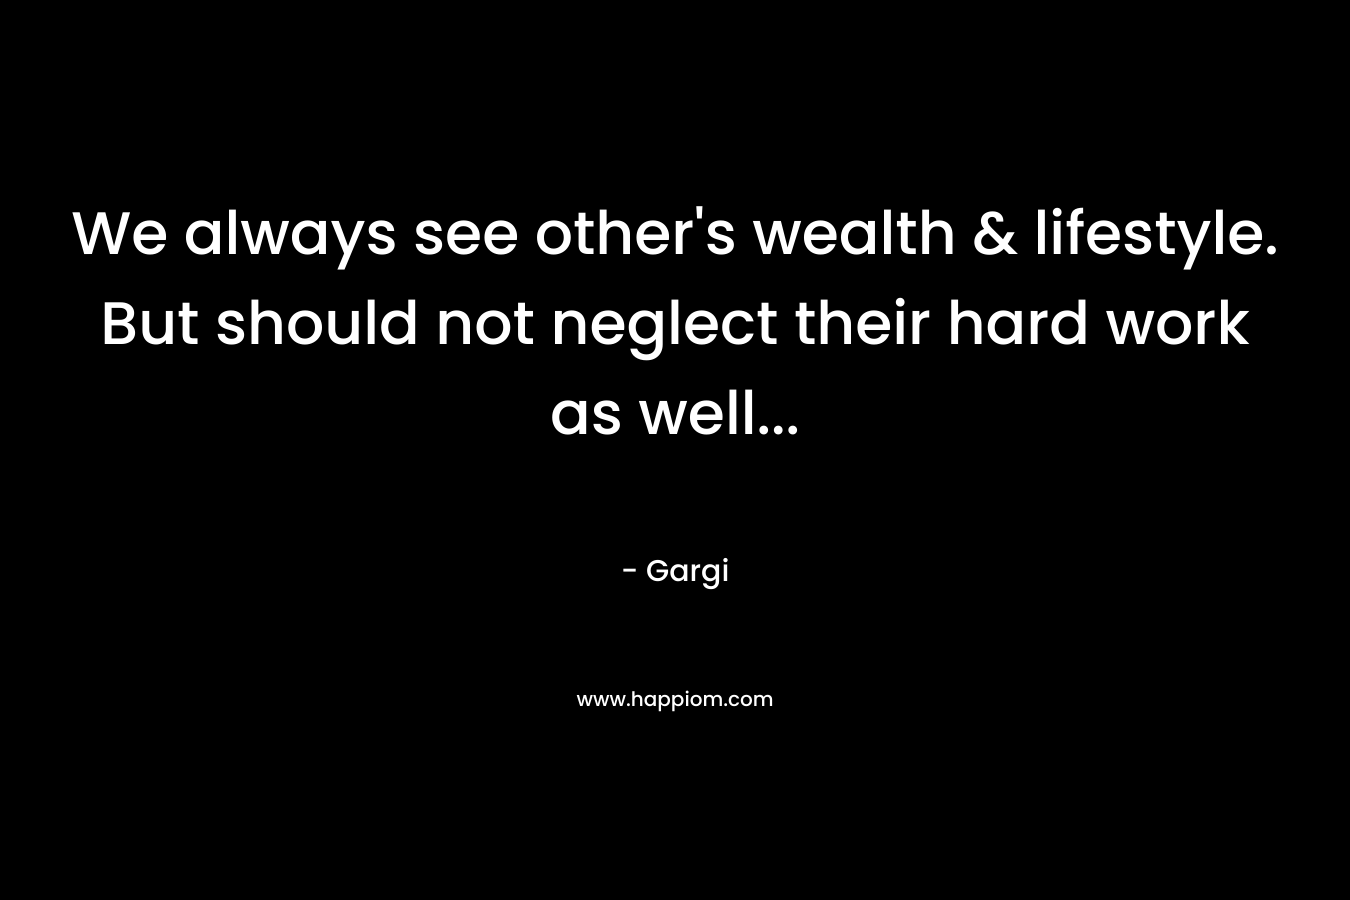 We always see other's wealth & lifestyle. But should not neglect their hard work as well...